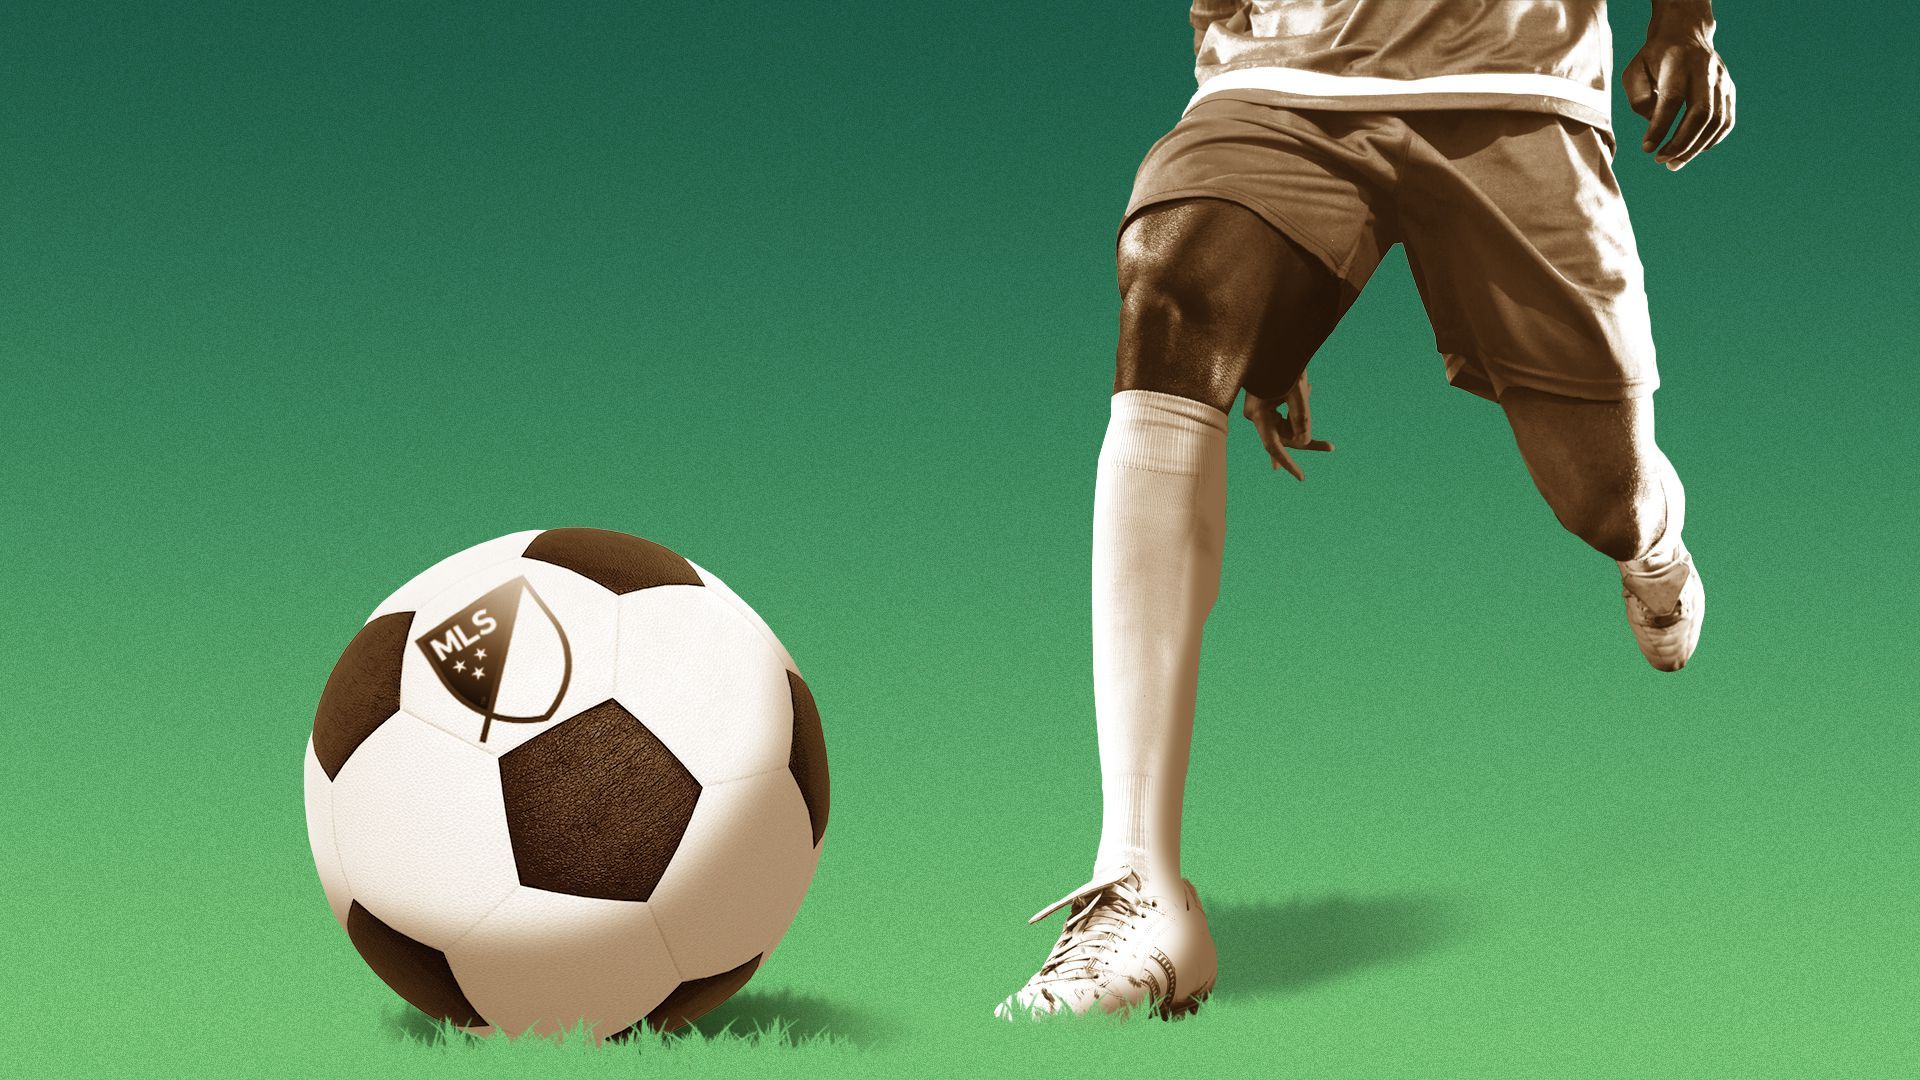 Illustration of a soccer player about to kick a ball with the MLS logo on it